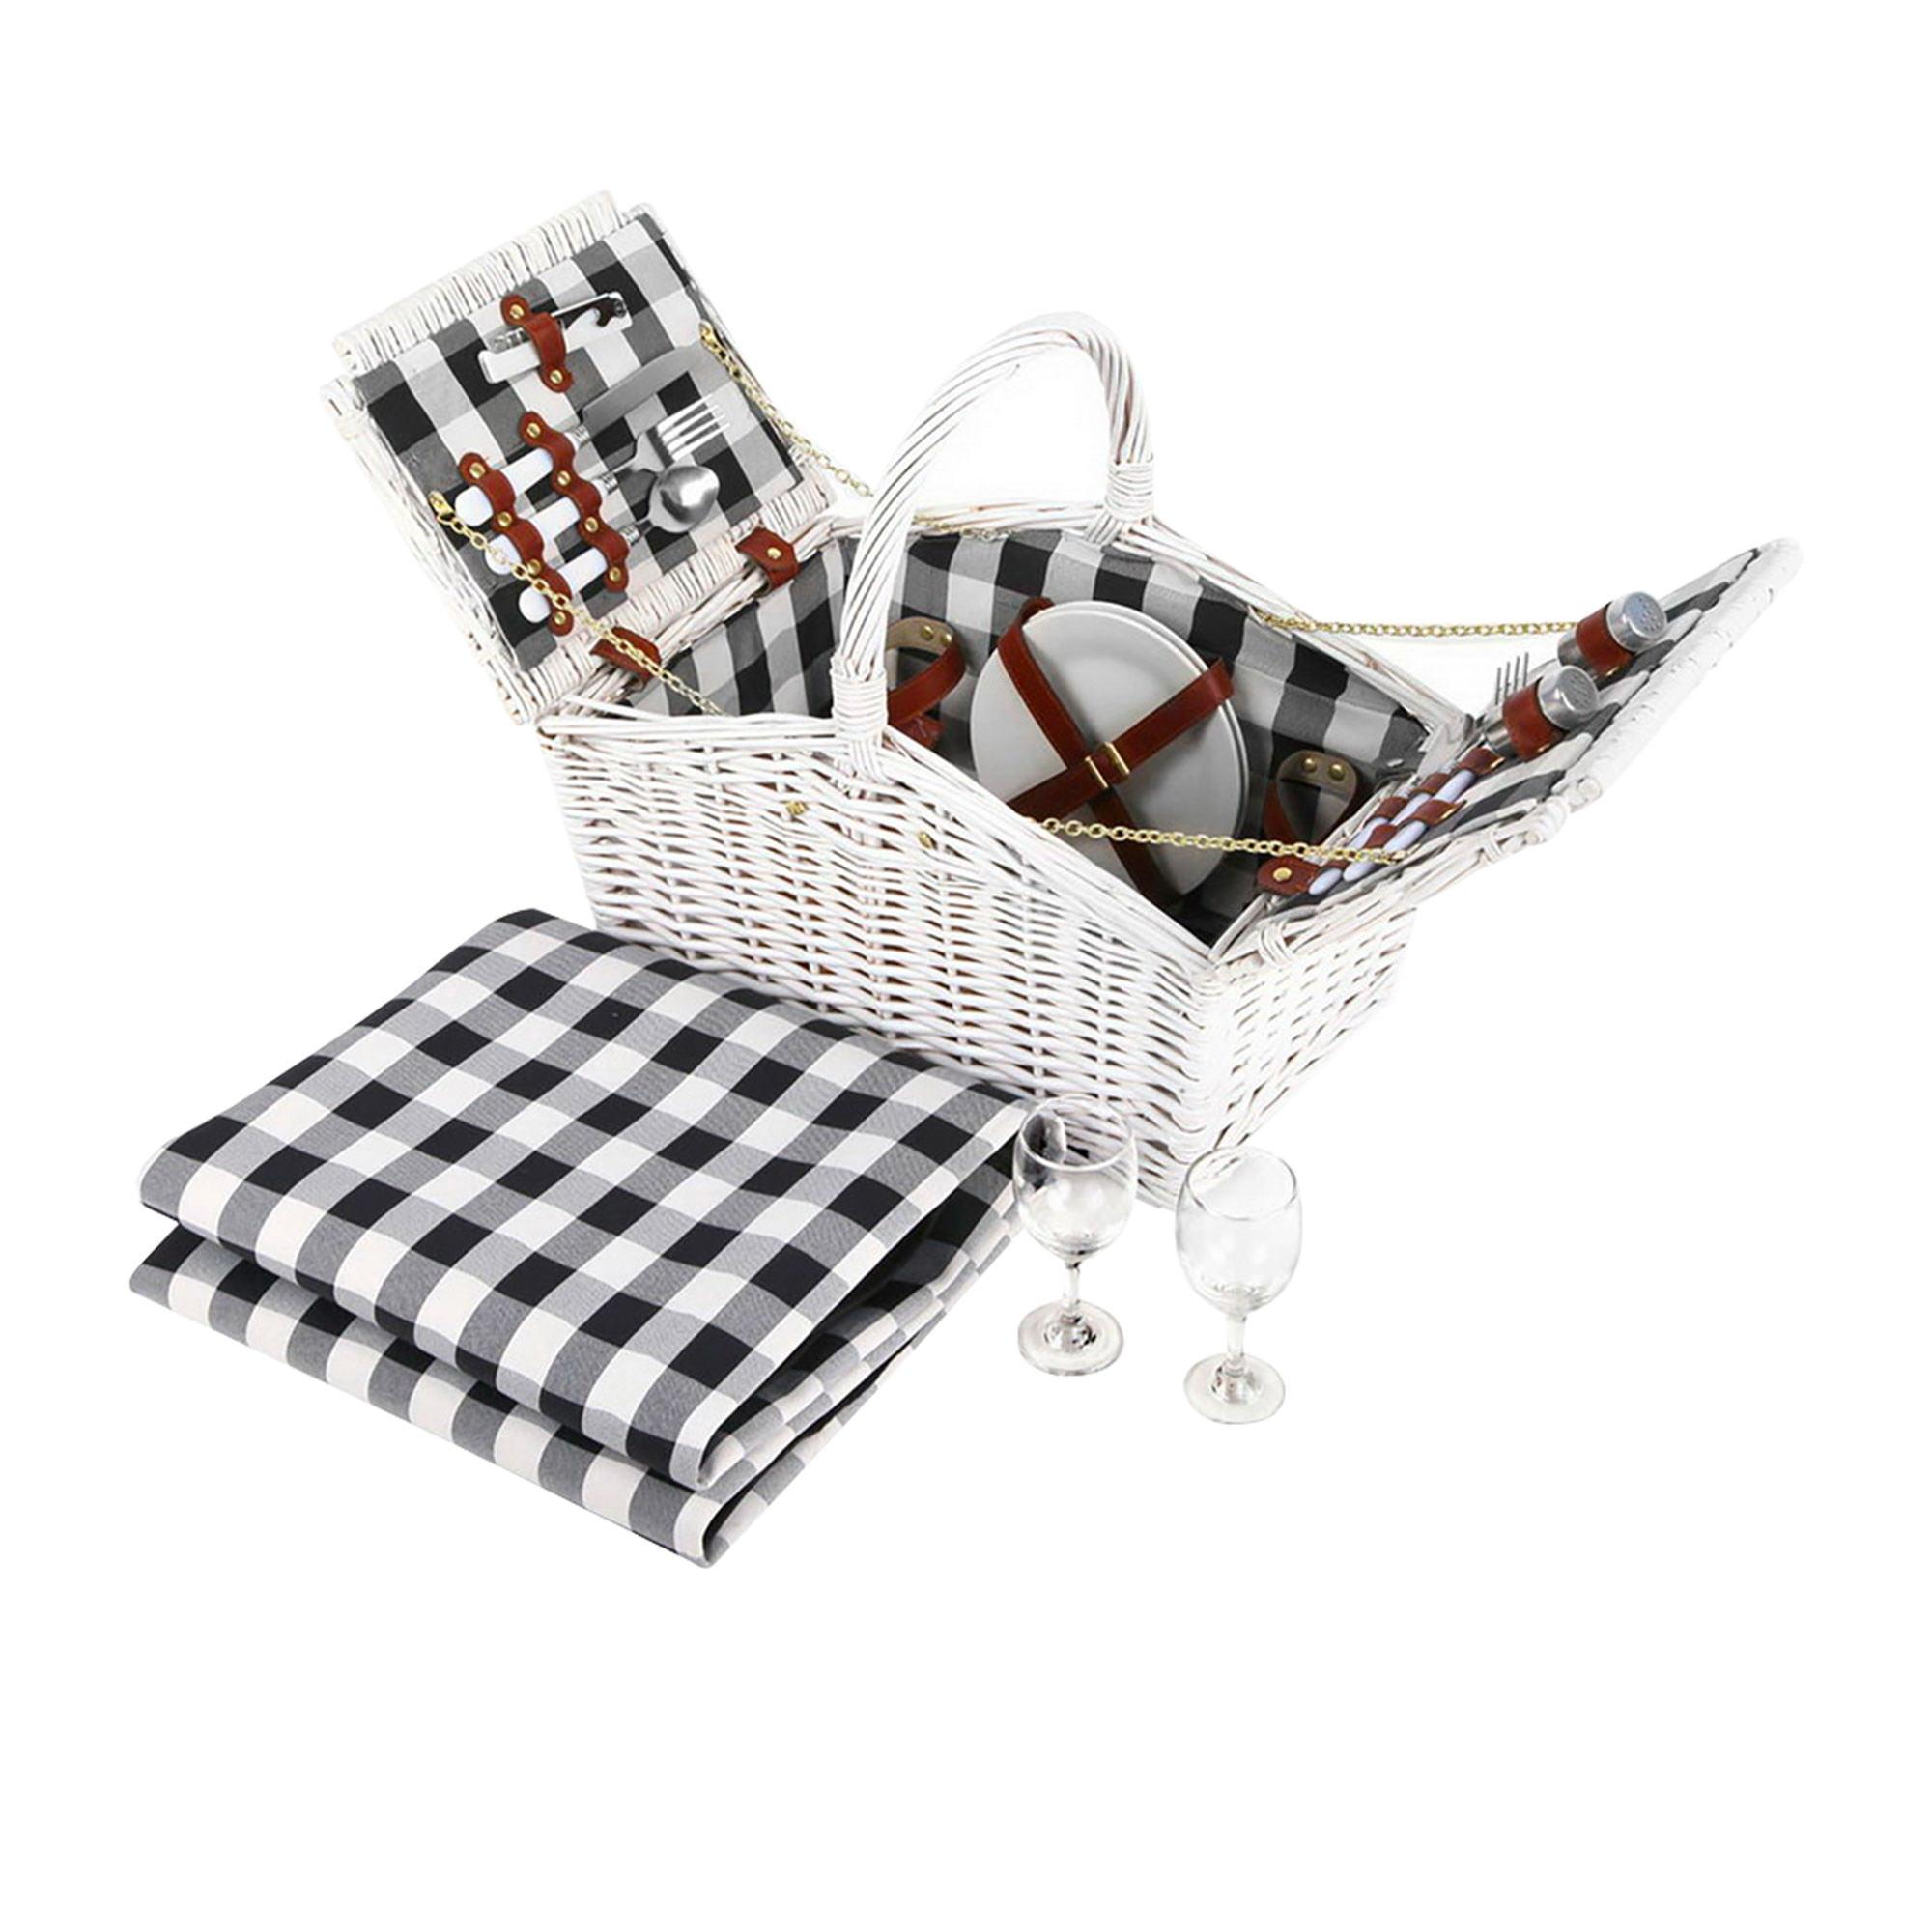 Alfresco 2 Person Deluxe Picnic Basket with Black/White Check Blanket Image 1